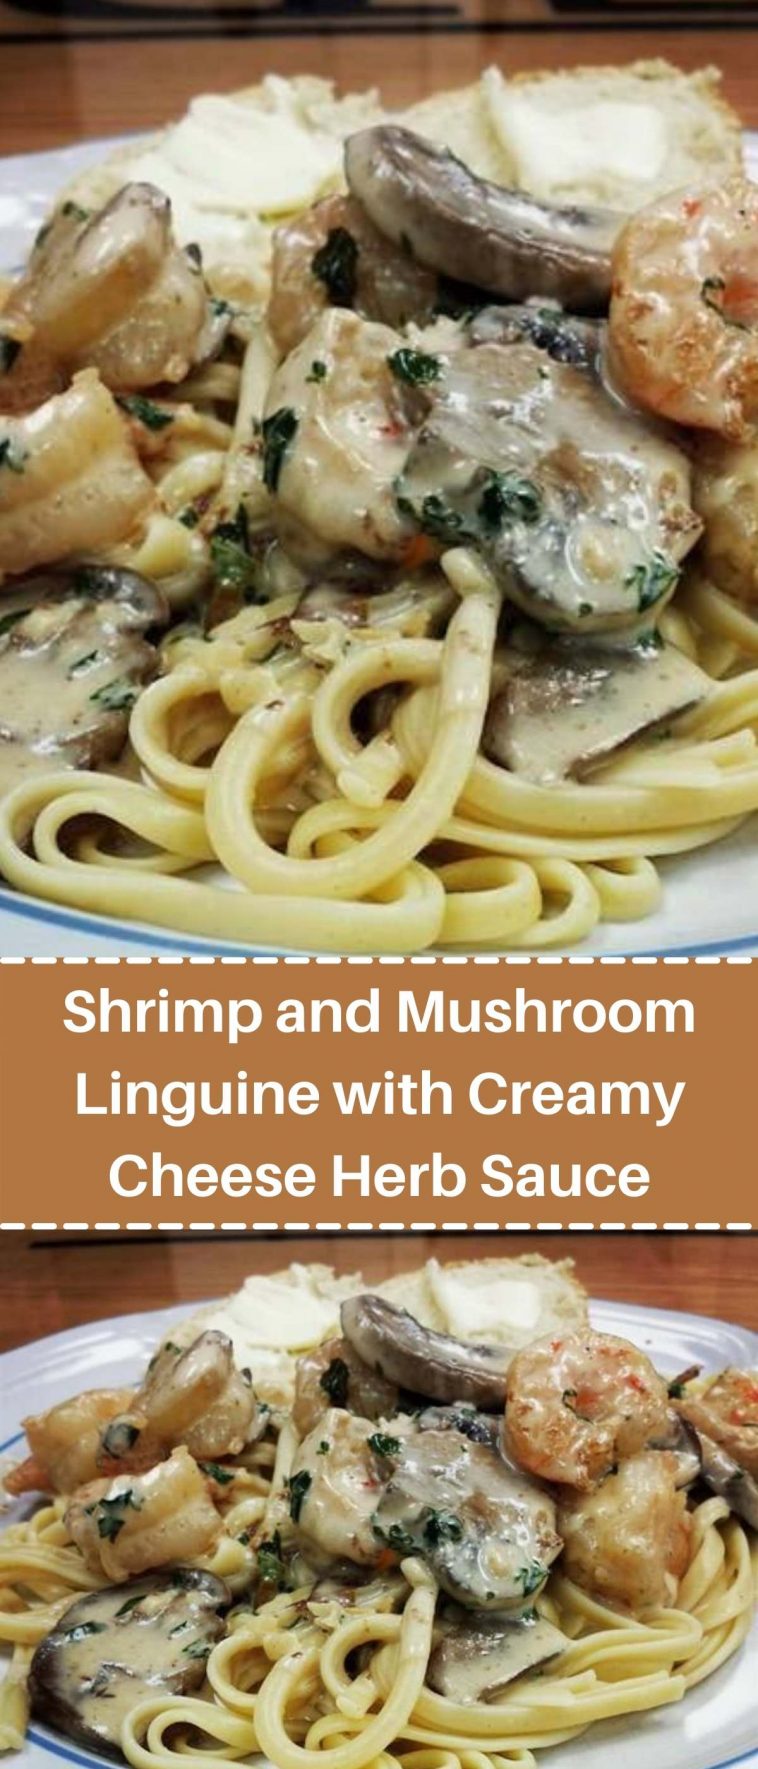 Shrimp and Mushroom Linguine with Creamy Cheese Herb Sauce